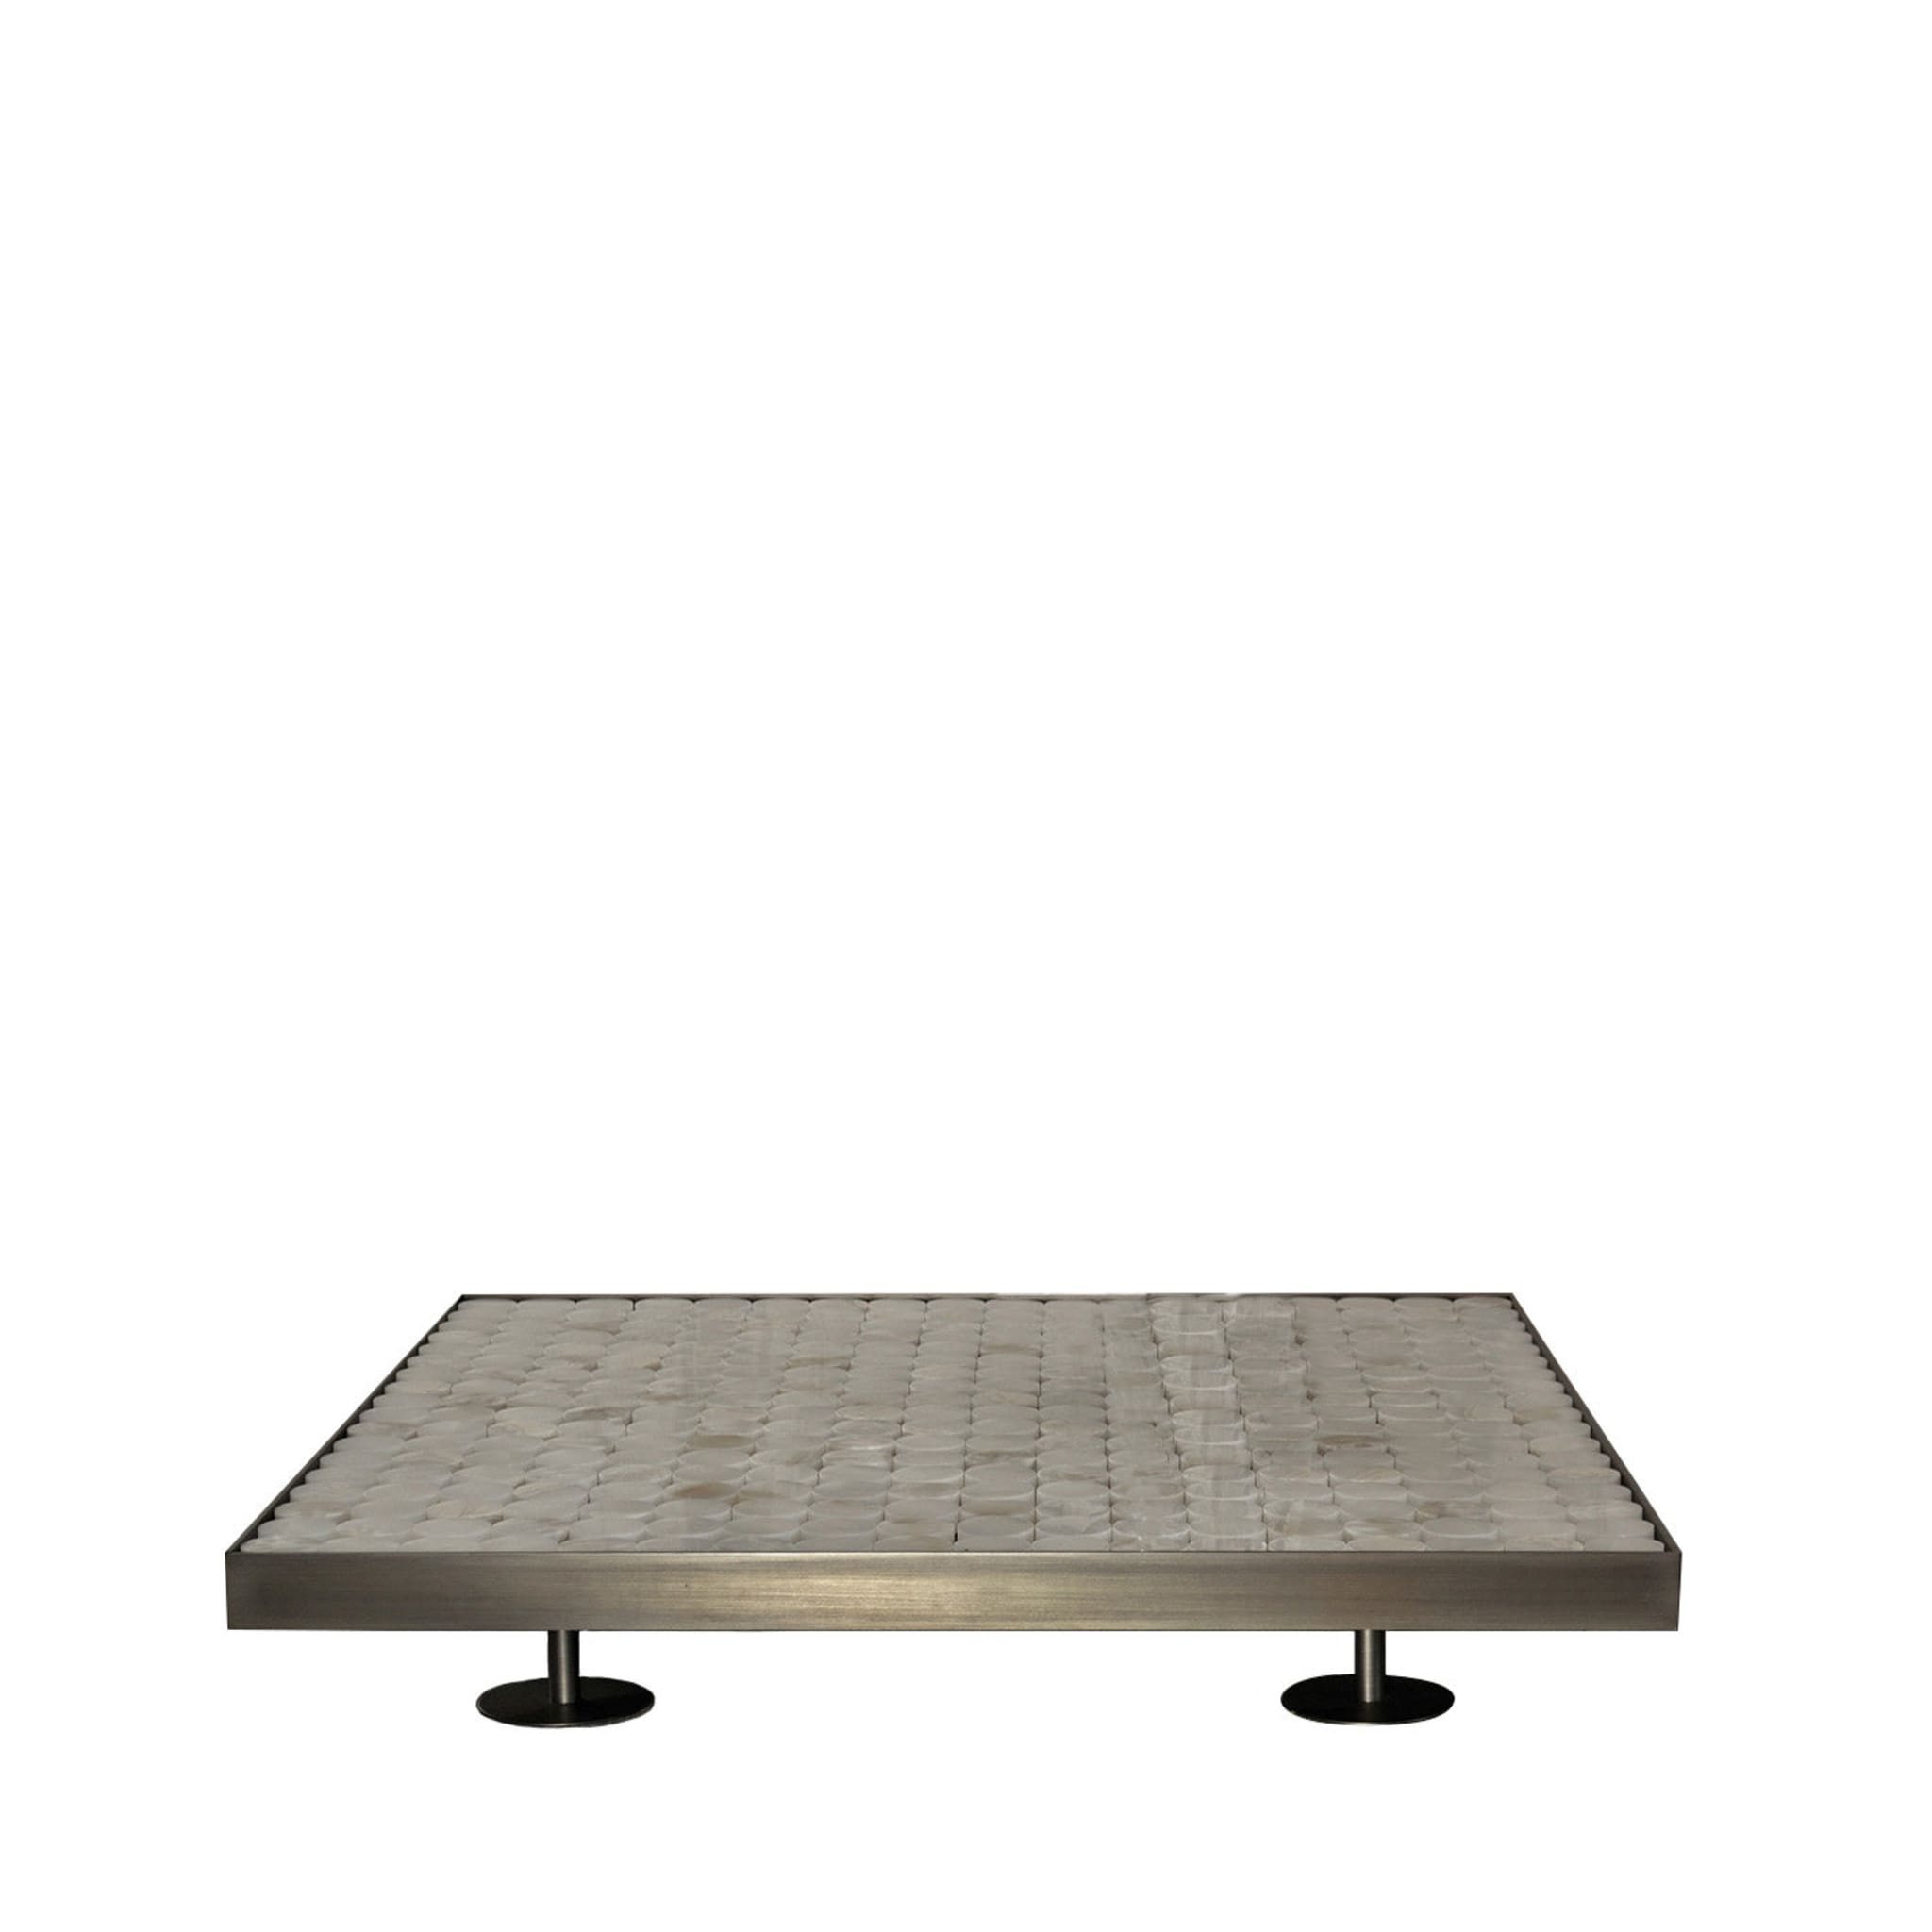 Sofia Coffee Table in Onyx - Main view